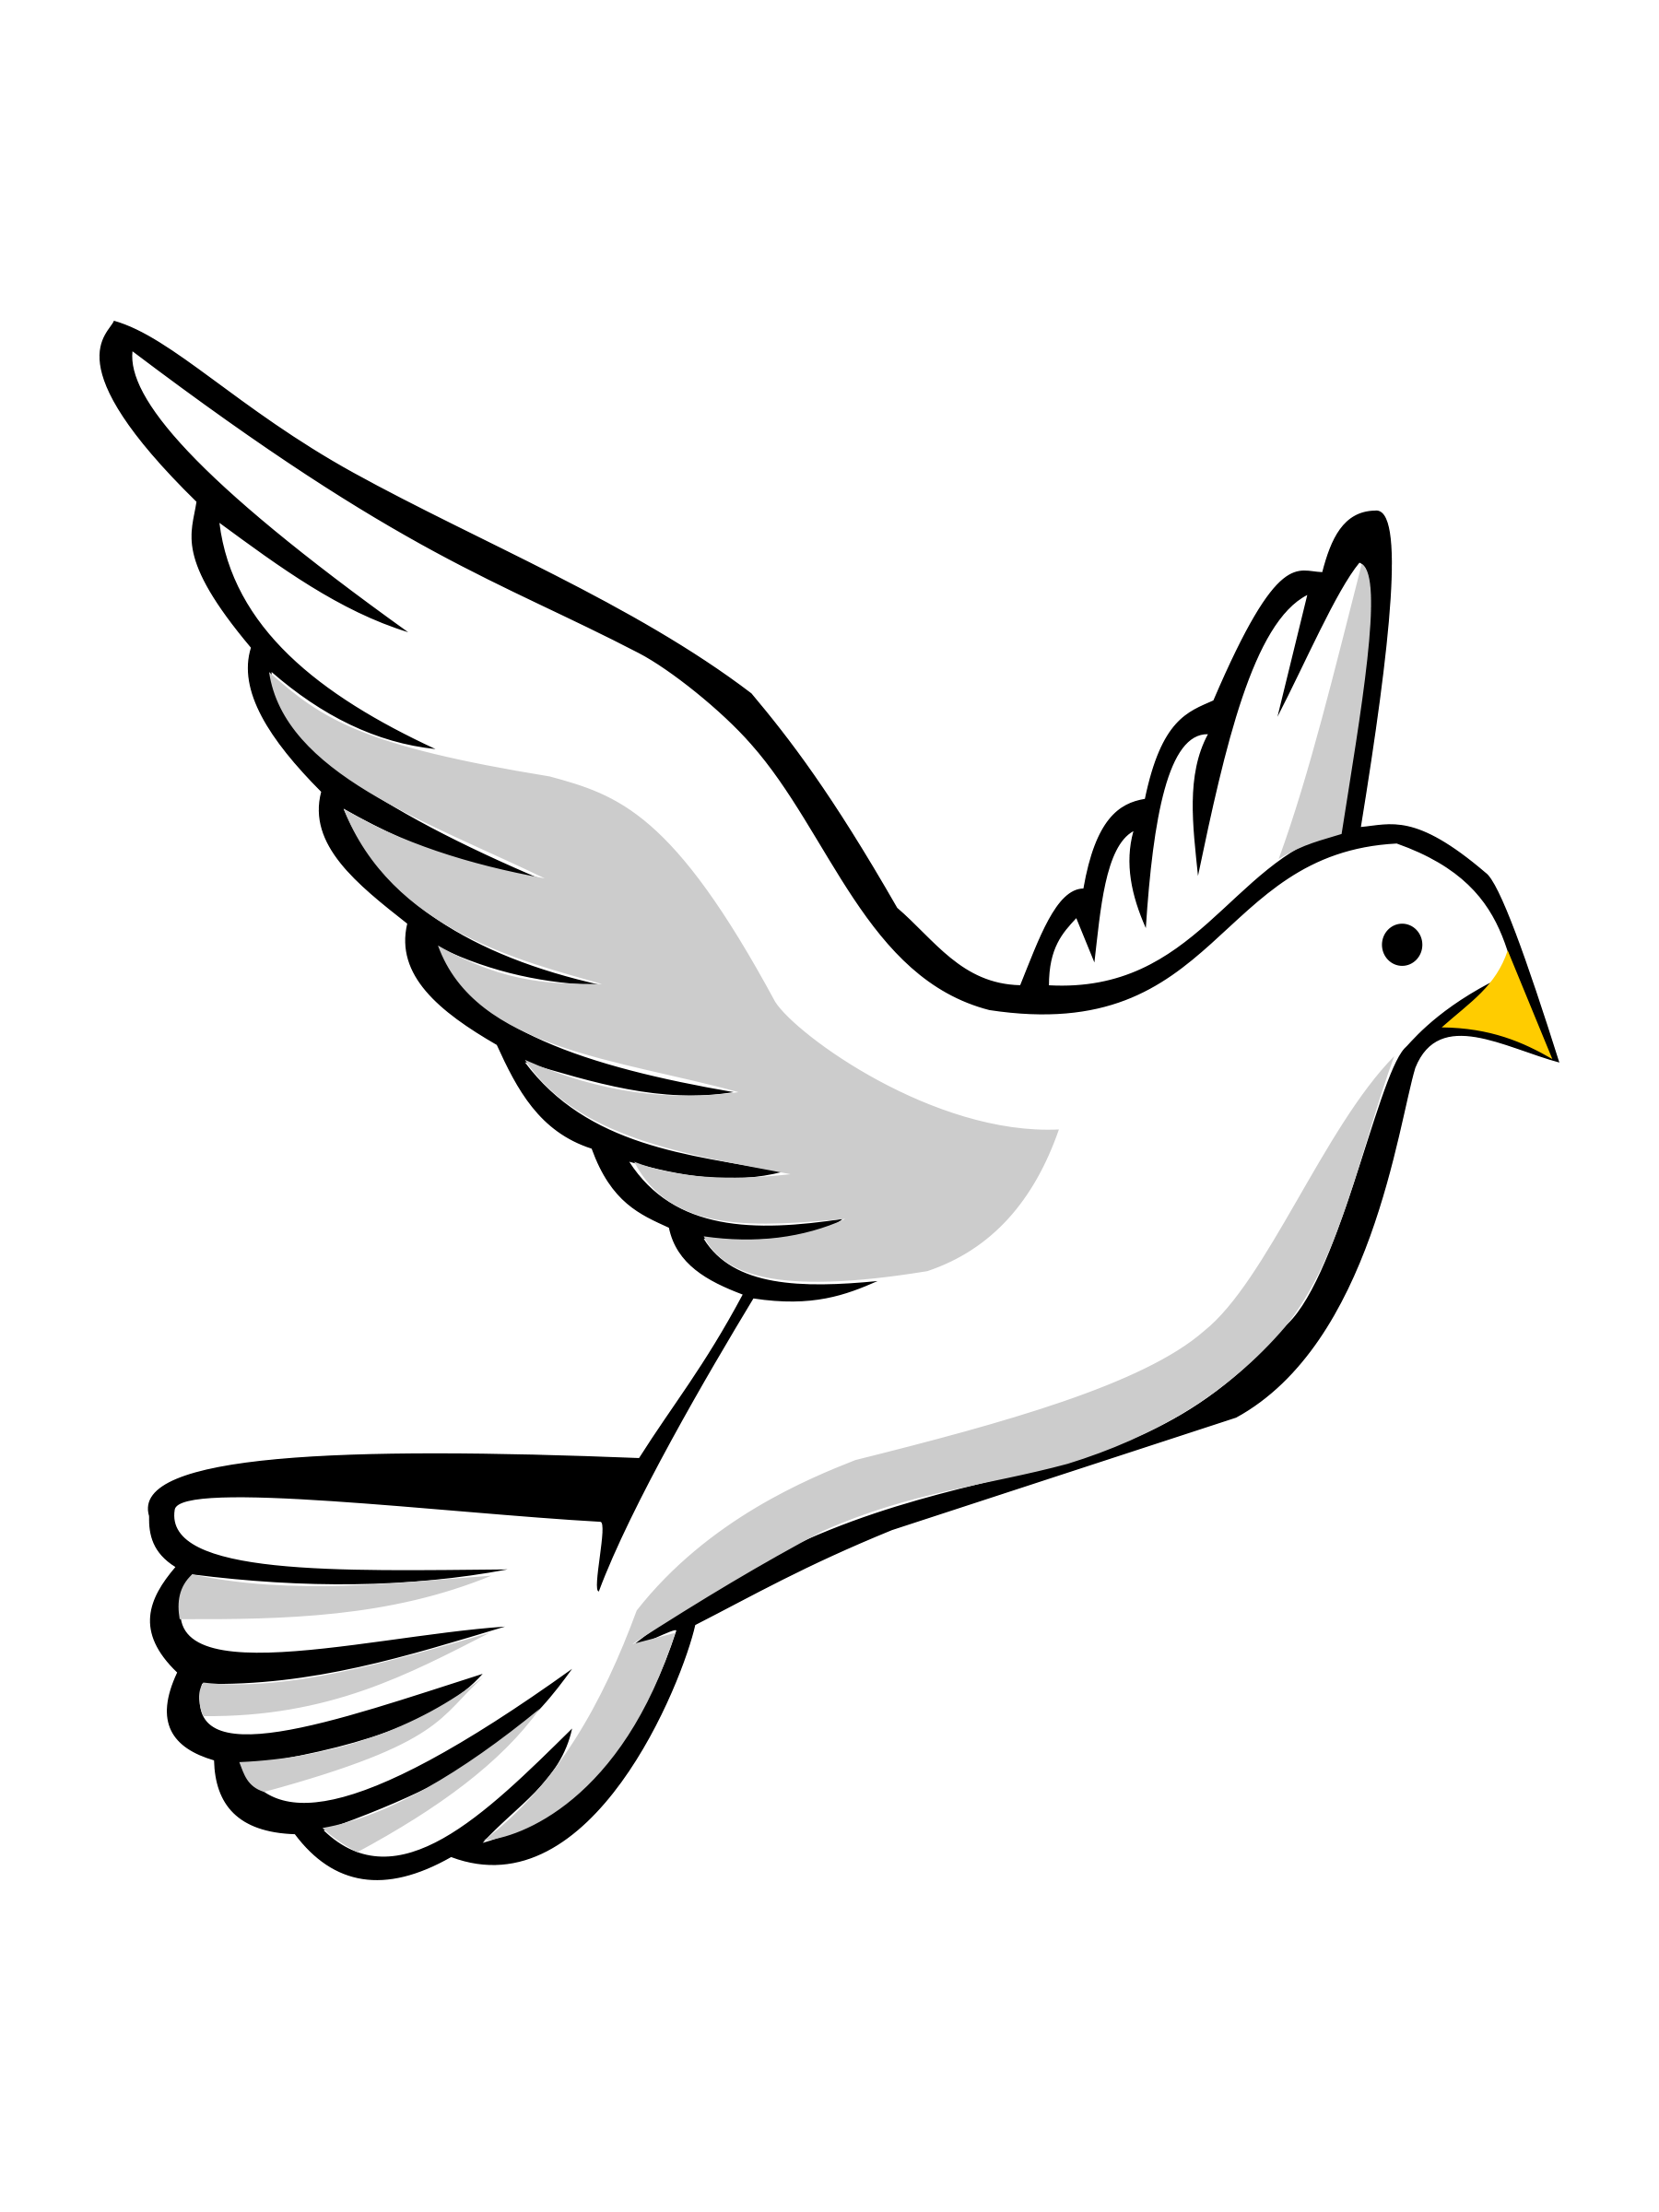 Wing clipart simple. Holy spirit dove panda